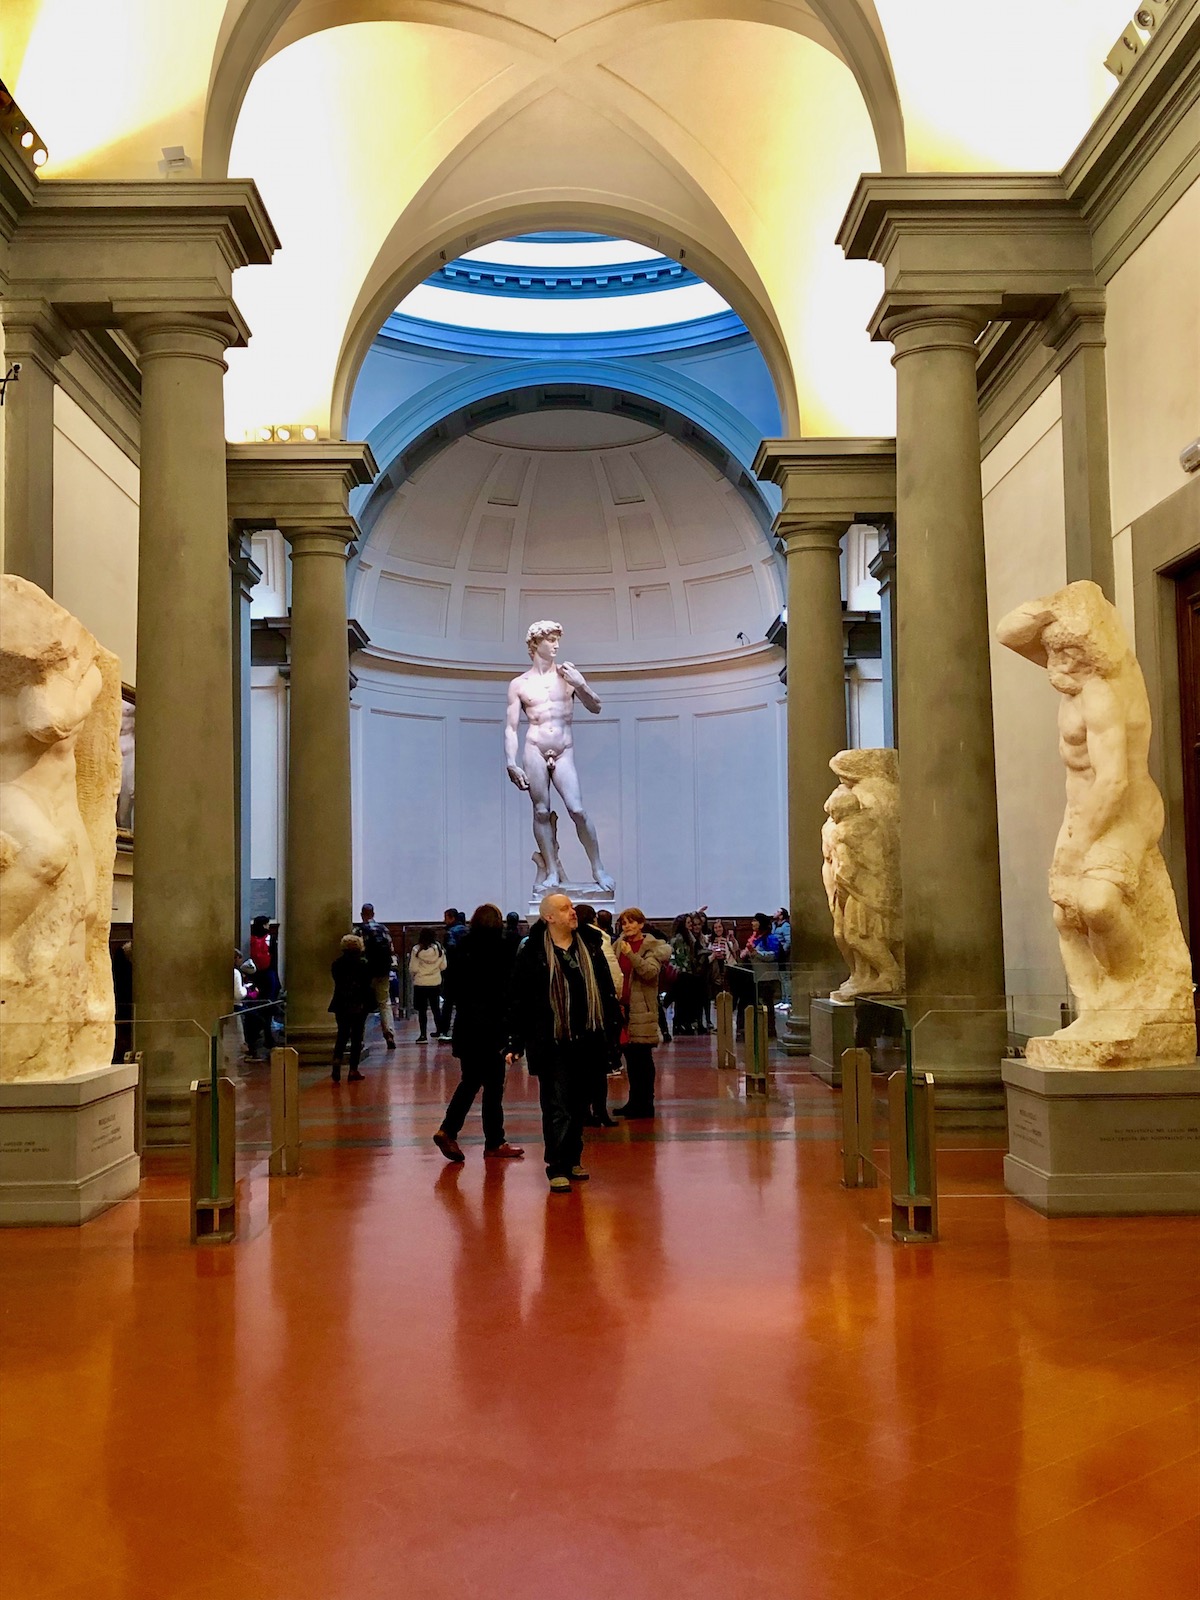 Hallway leading to the David sculpture at the Accademia Museum in Florence